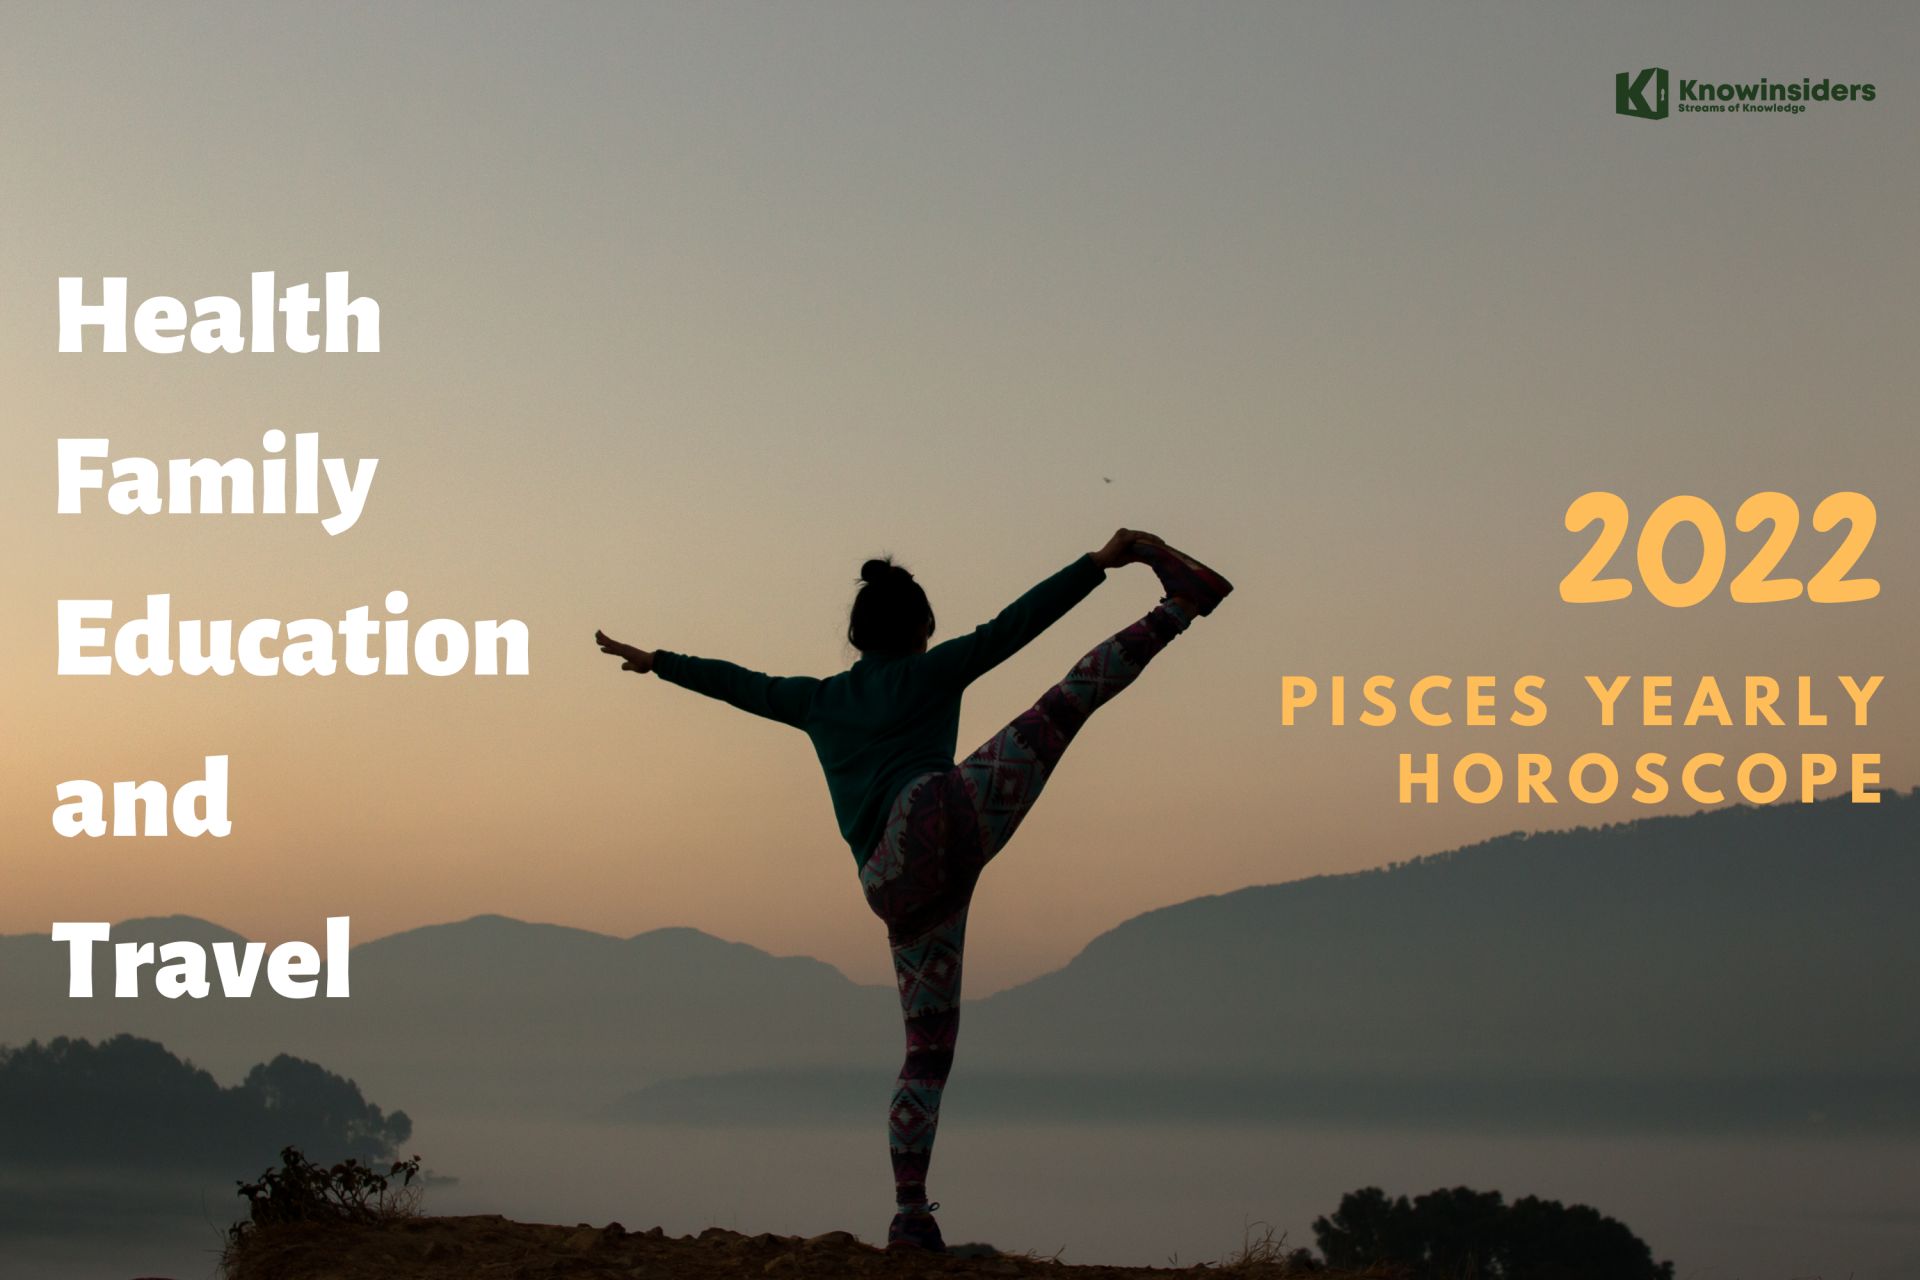 PISCES Yearly Horoscope 2022: Predictions for Health, Family, Education and Travel